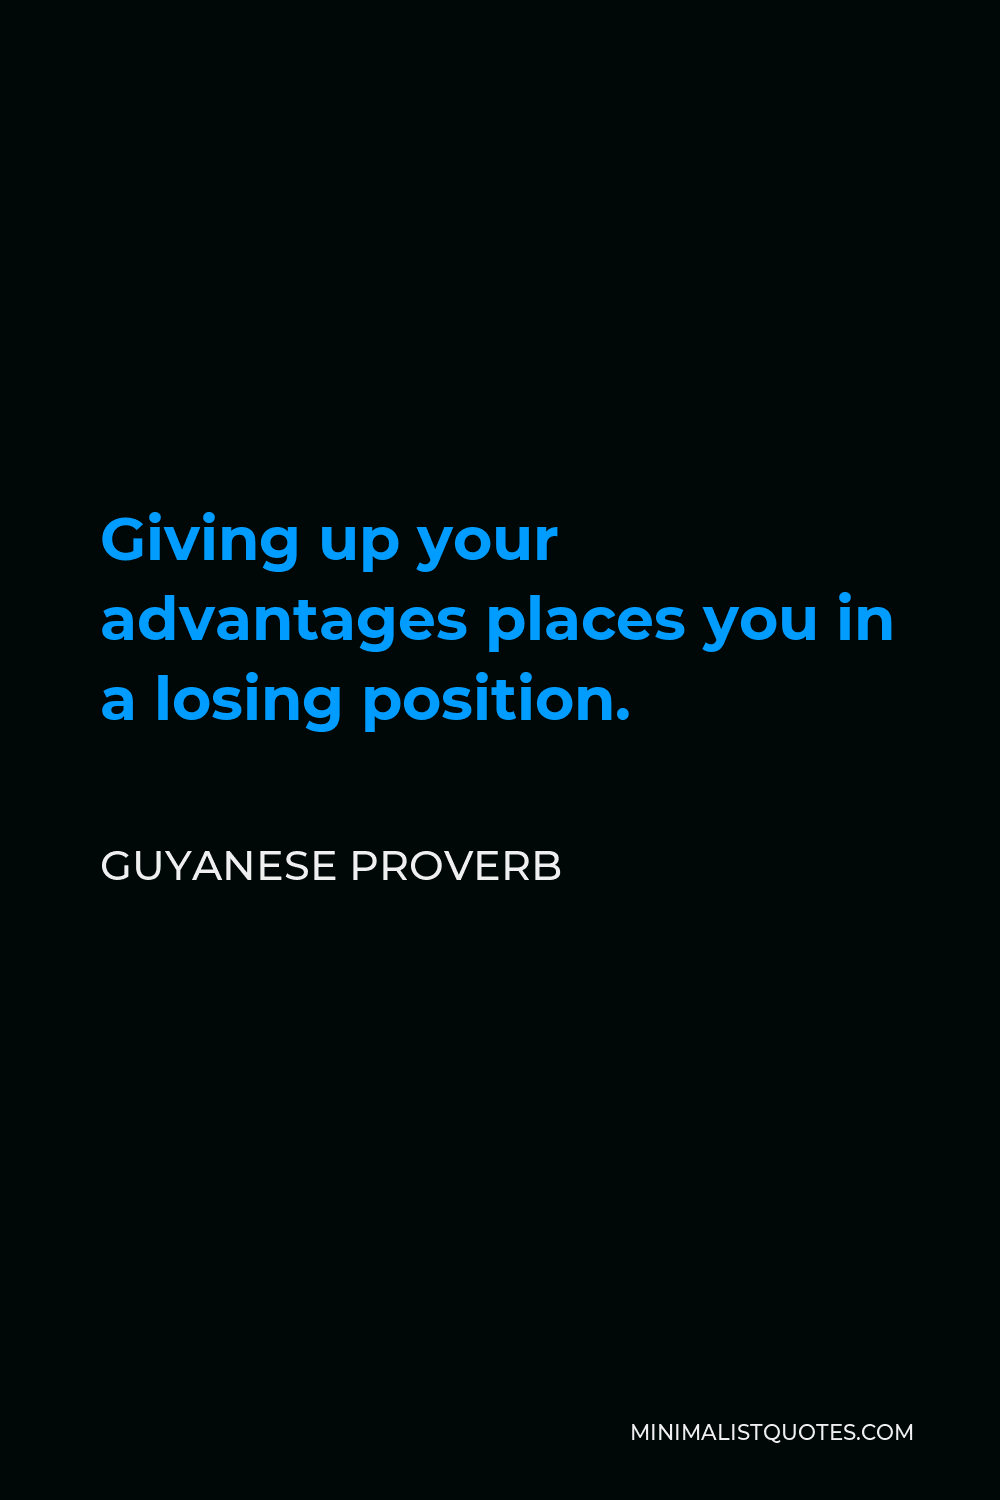 Guyanese Proverb Quote - Giving up your advantages places you in a losing position.